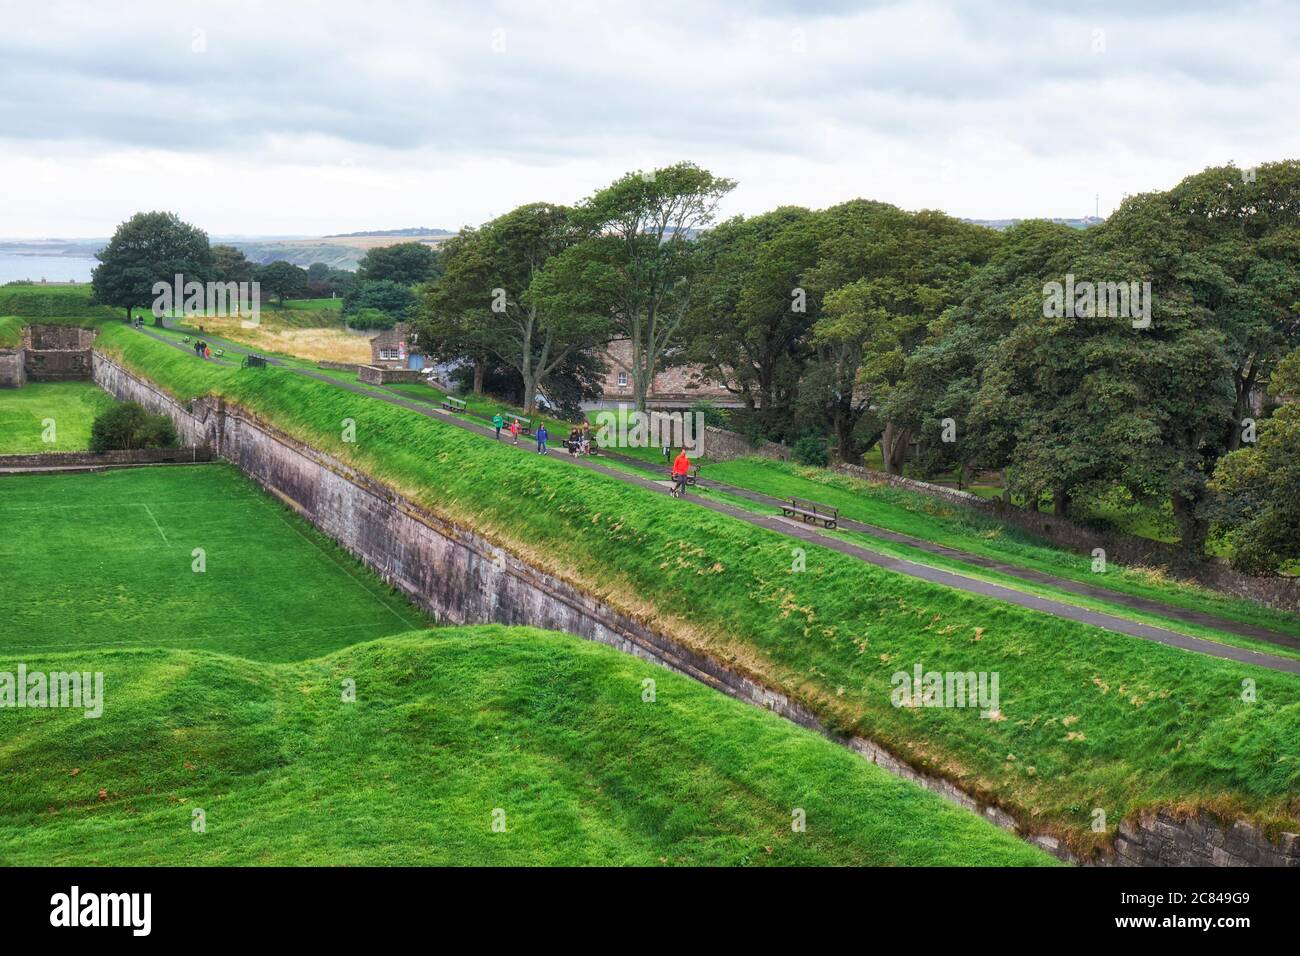 View of the ramparts, a defensive wall surrounding the old garrison town of Berwick-upon-Tweed Stock Photo